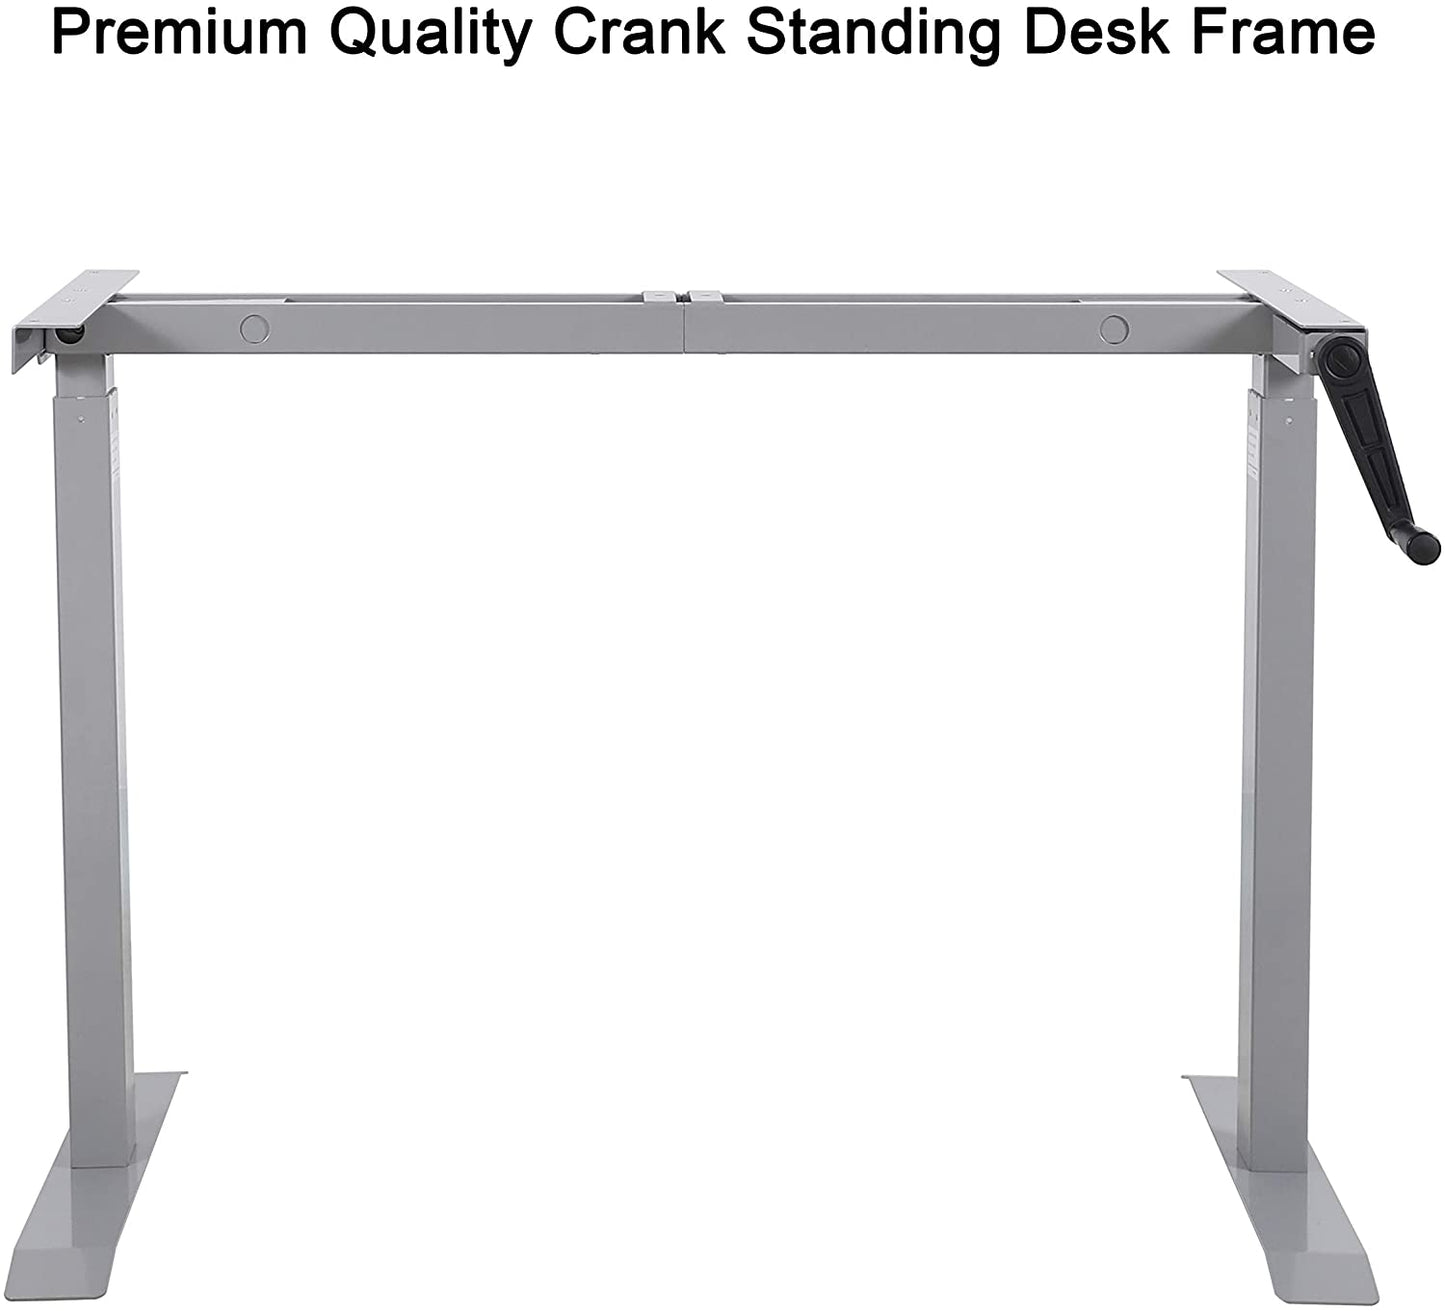 UNICOO – Premium Quality Crank Stand Up Desk Frame with Double Beam Heavy Duty Steel Construction, Adjustable Height Sit to Stand Up Desk Frame with Foldable Handle (Crank Frame)